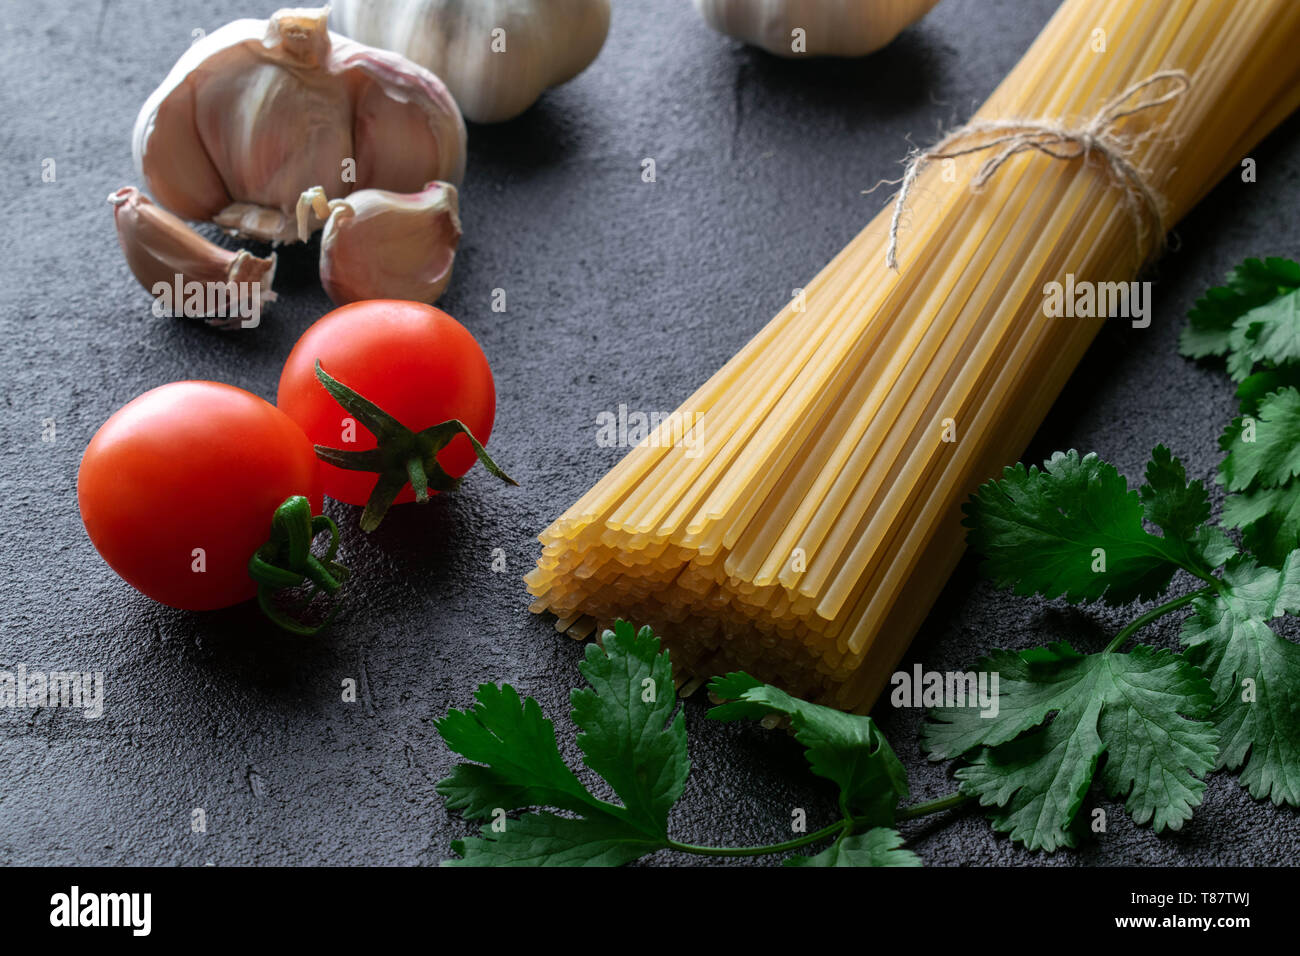 uncooked spaghetti pasta tied up with rope from burlap with cherry tomatoes, garlic heads and fresh branches of green cilantro on black background Stock Photo